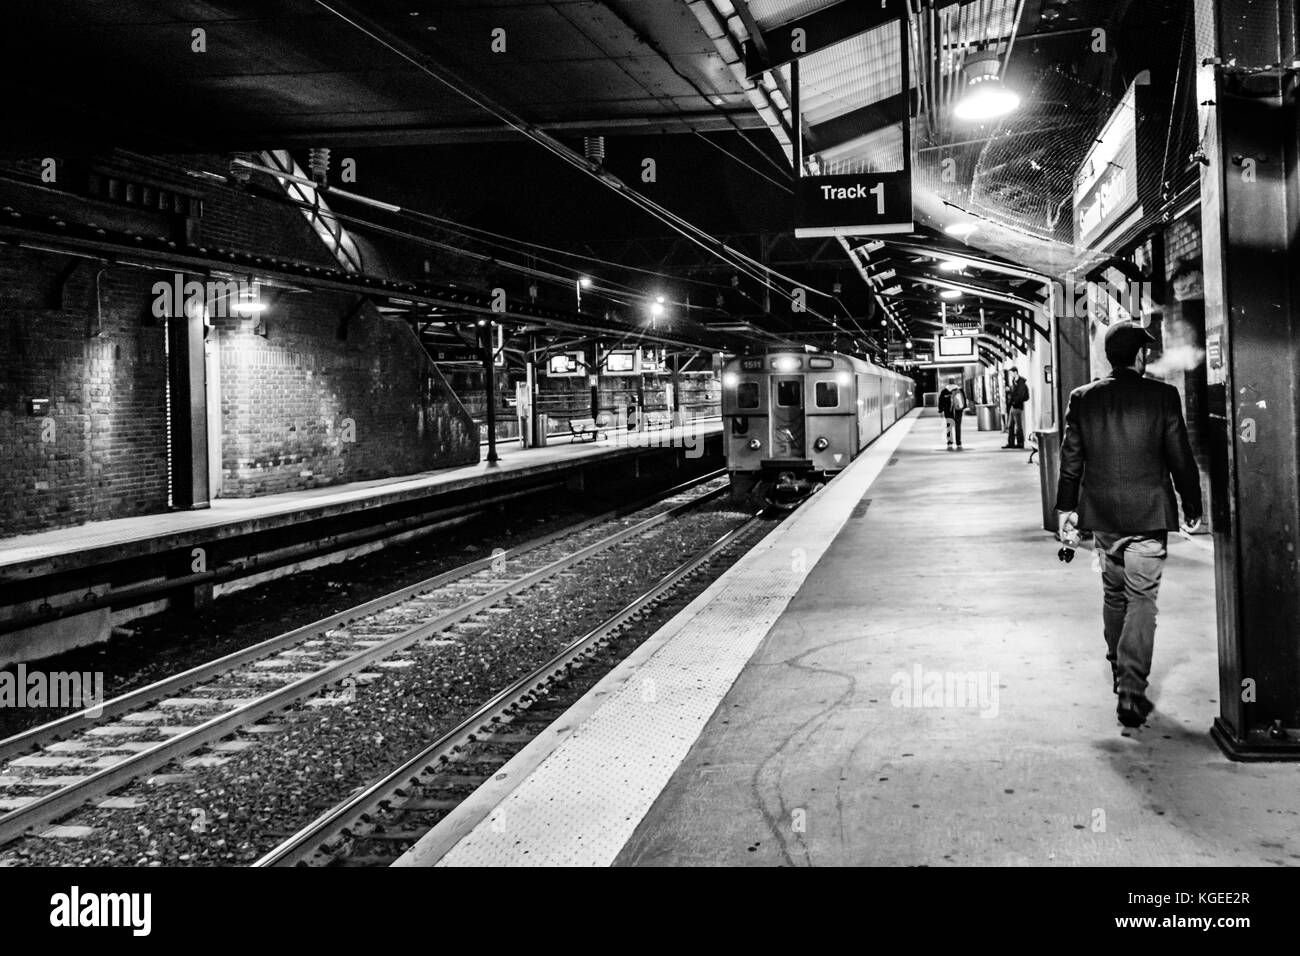 Summit, NJ USA - November 1, 2017:  A hip and fashionable man in hat and sport coat exists NJ Transit train station at night, black and white Stock Photo